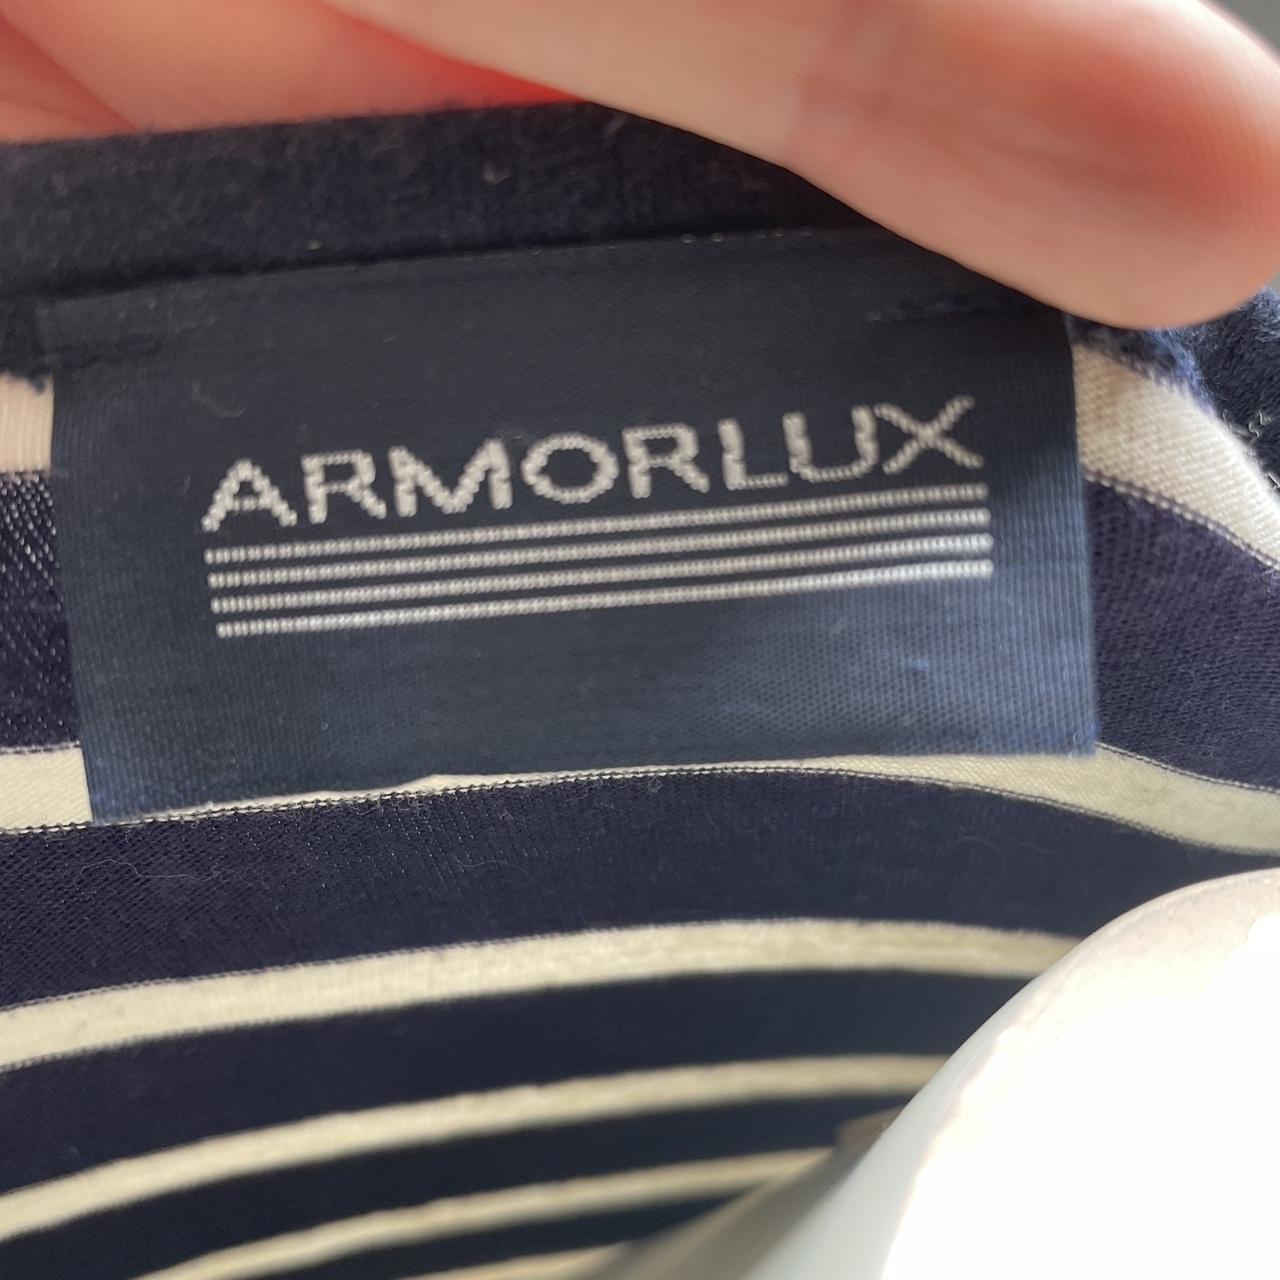 Armor Lux Women's Navy and White Vest (2)